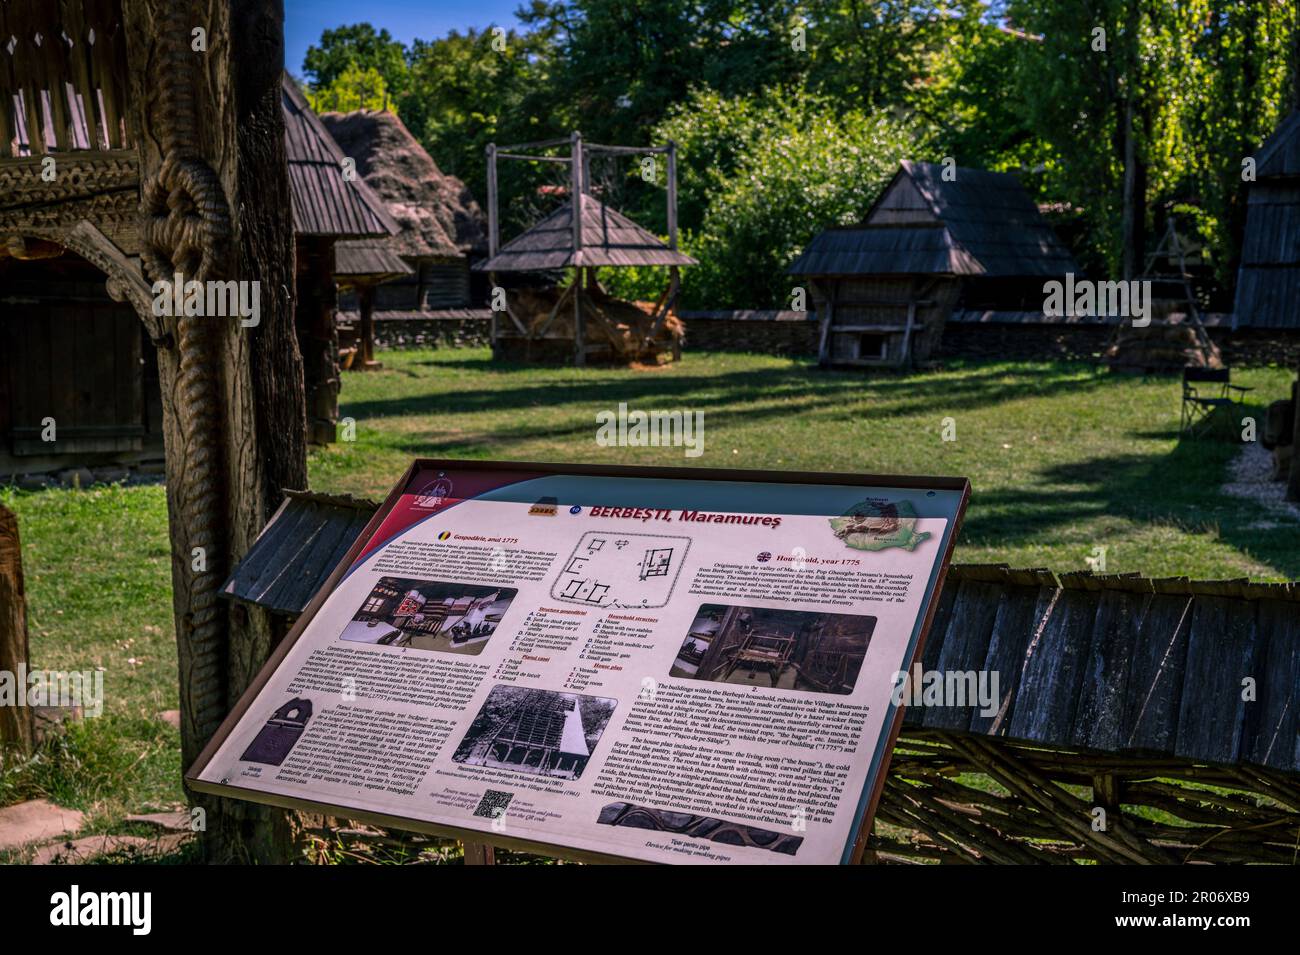 traditional houses from Berbesti, Maramures. Dimitrie Gusti National Village museum in Bucharest, ROMANIA Stock Photo